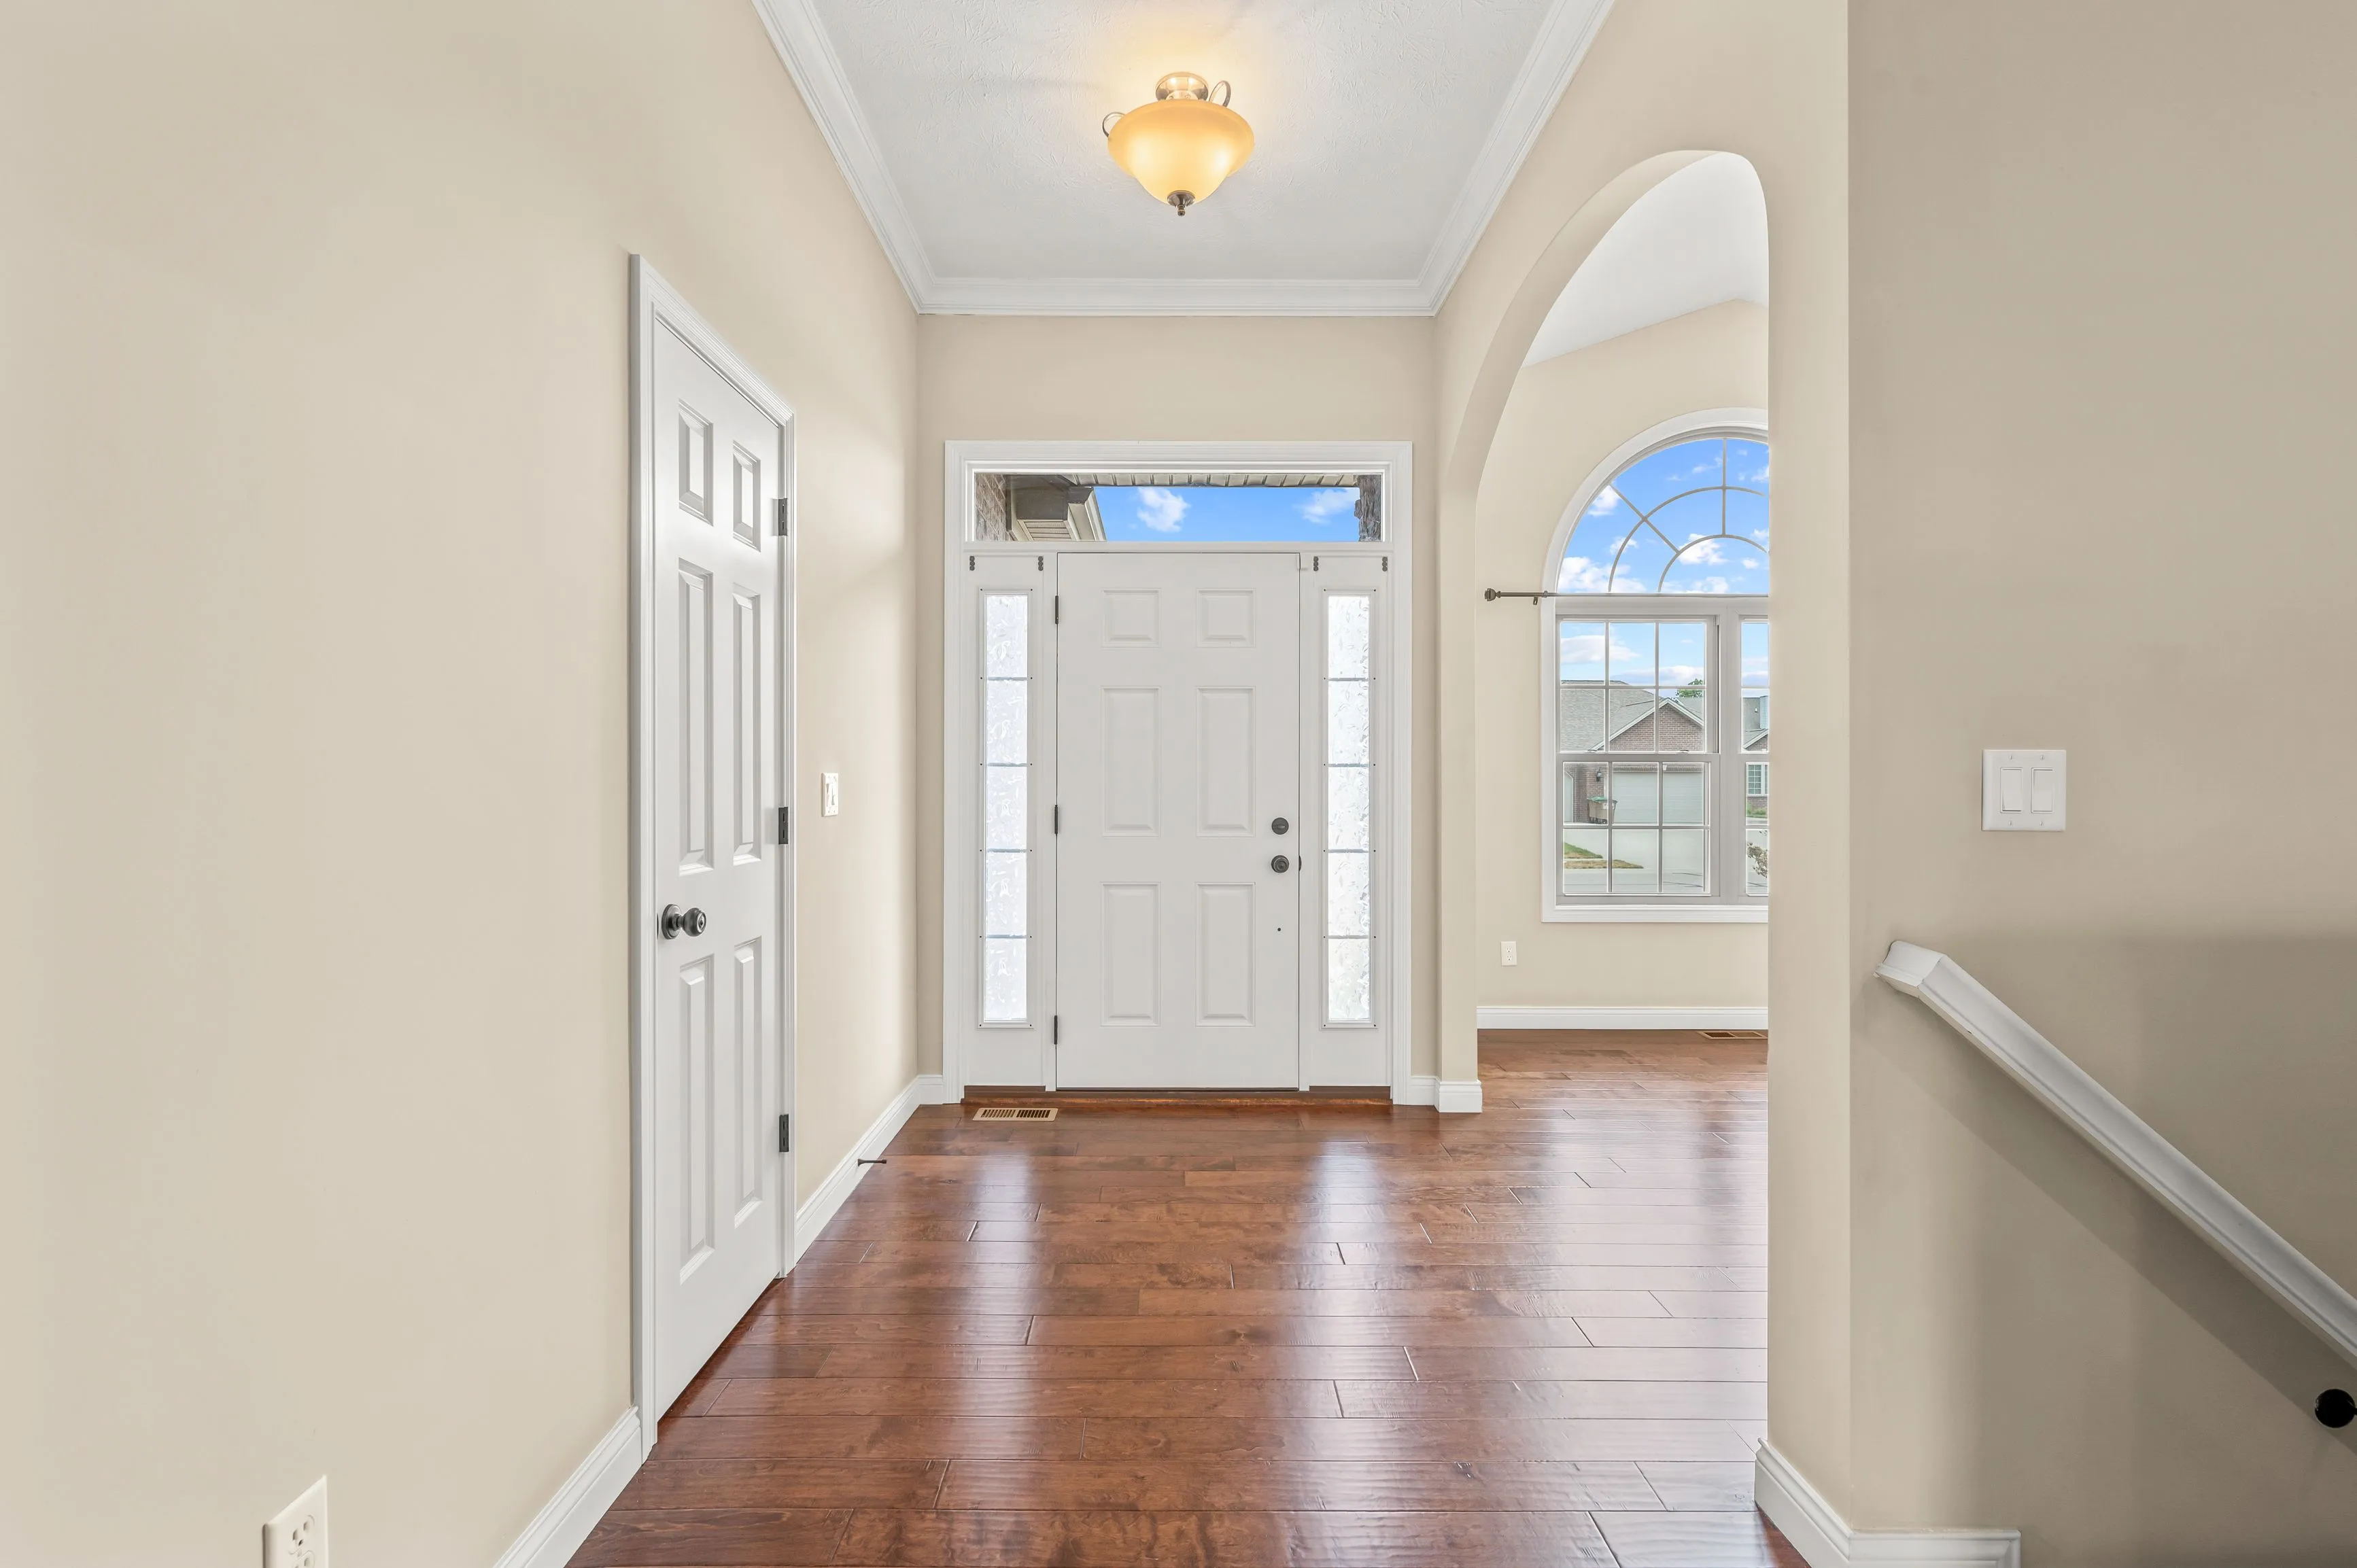 Bright entry hallway in a home with wooden floors, white walls, and a front door with sidelights.